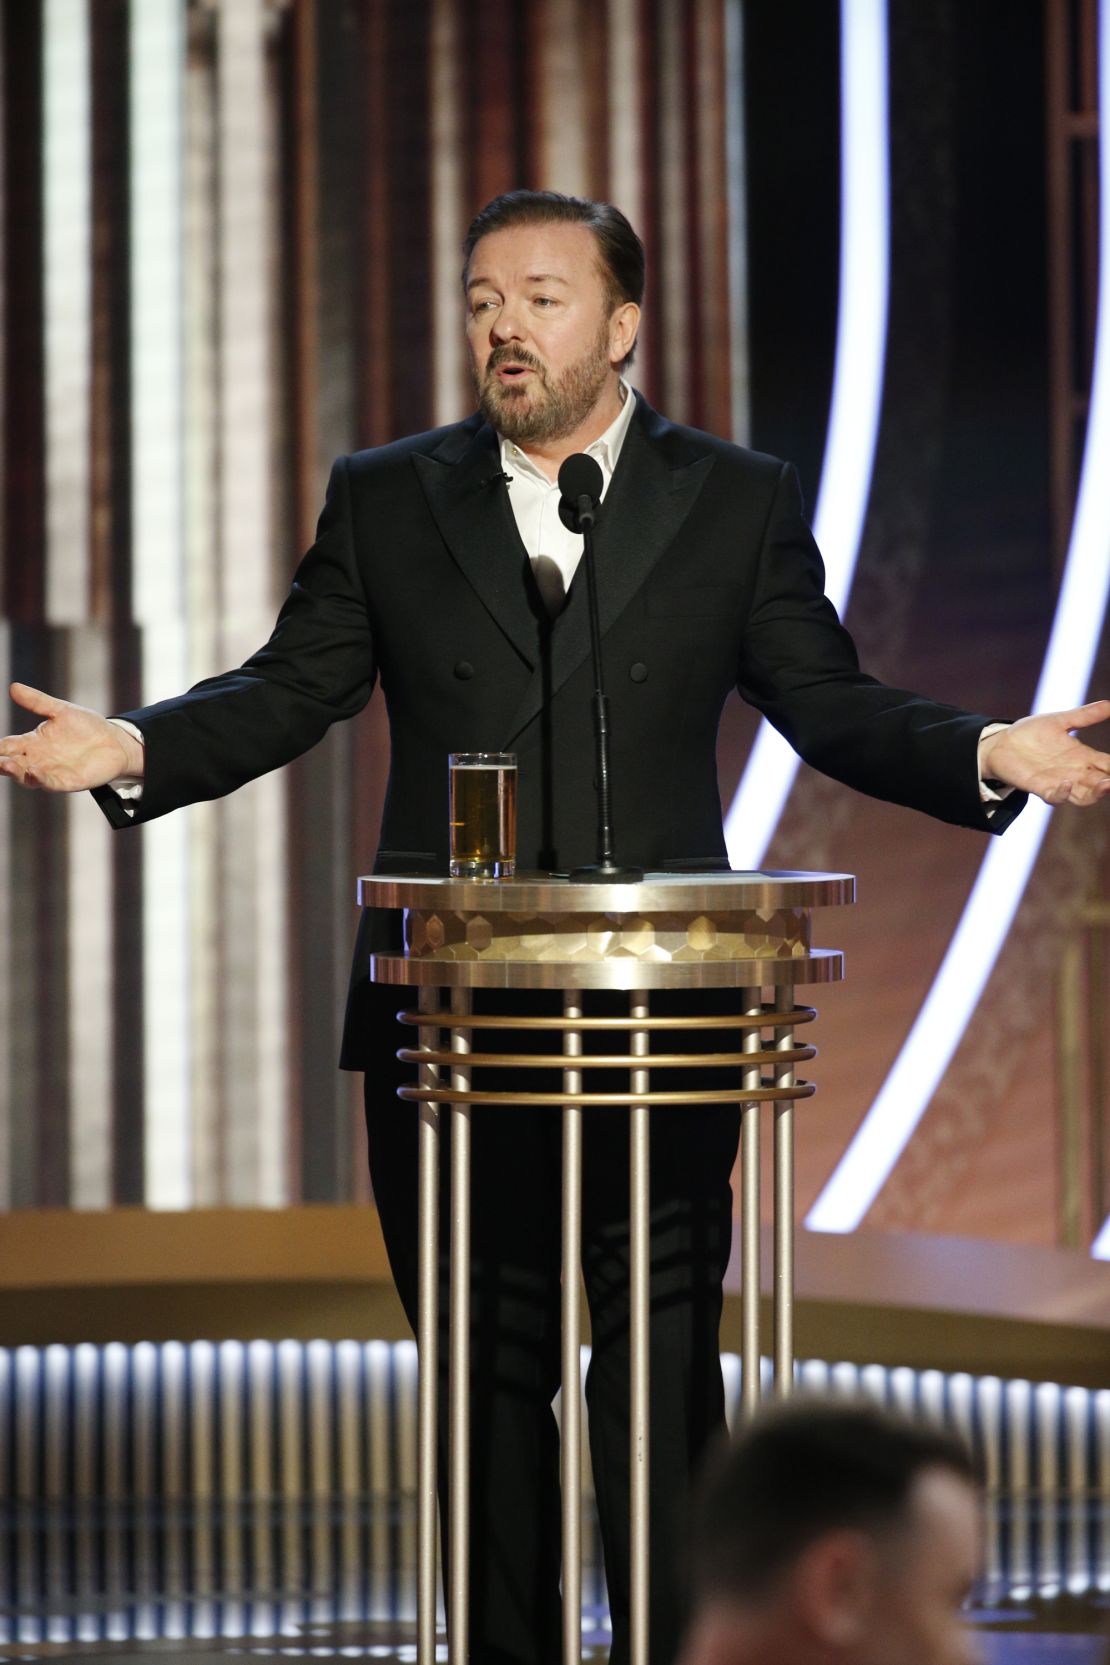 Ricky Gervais hosted the show for a fifth time